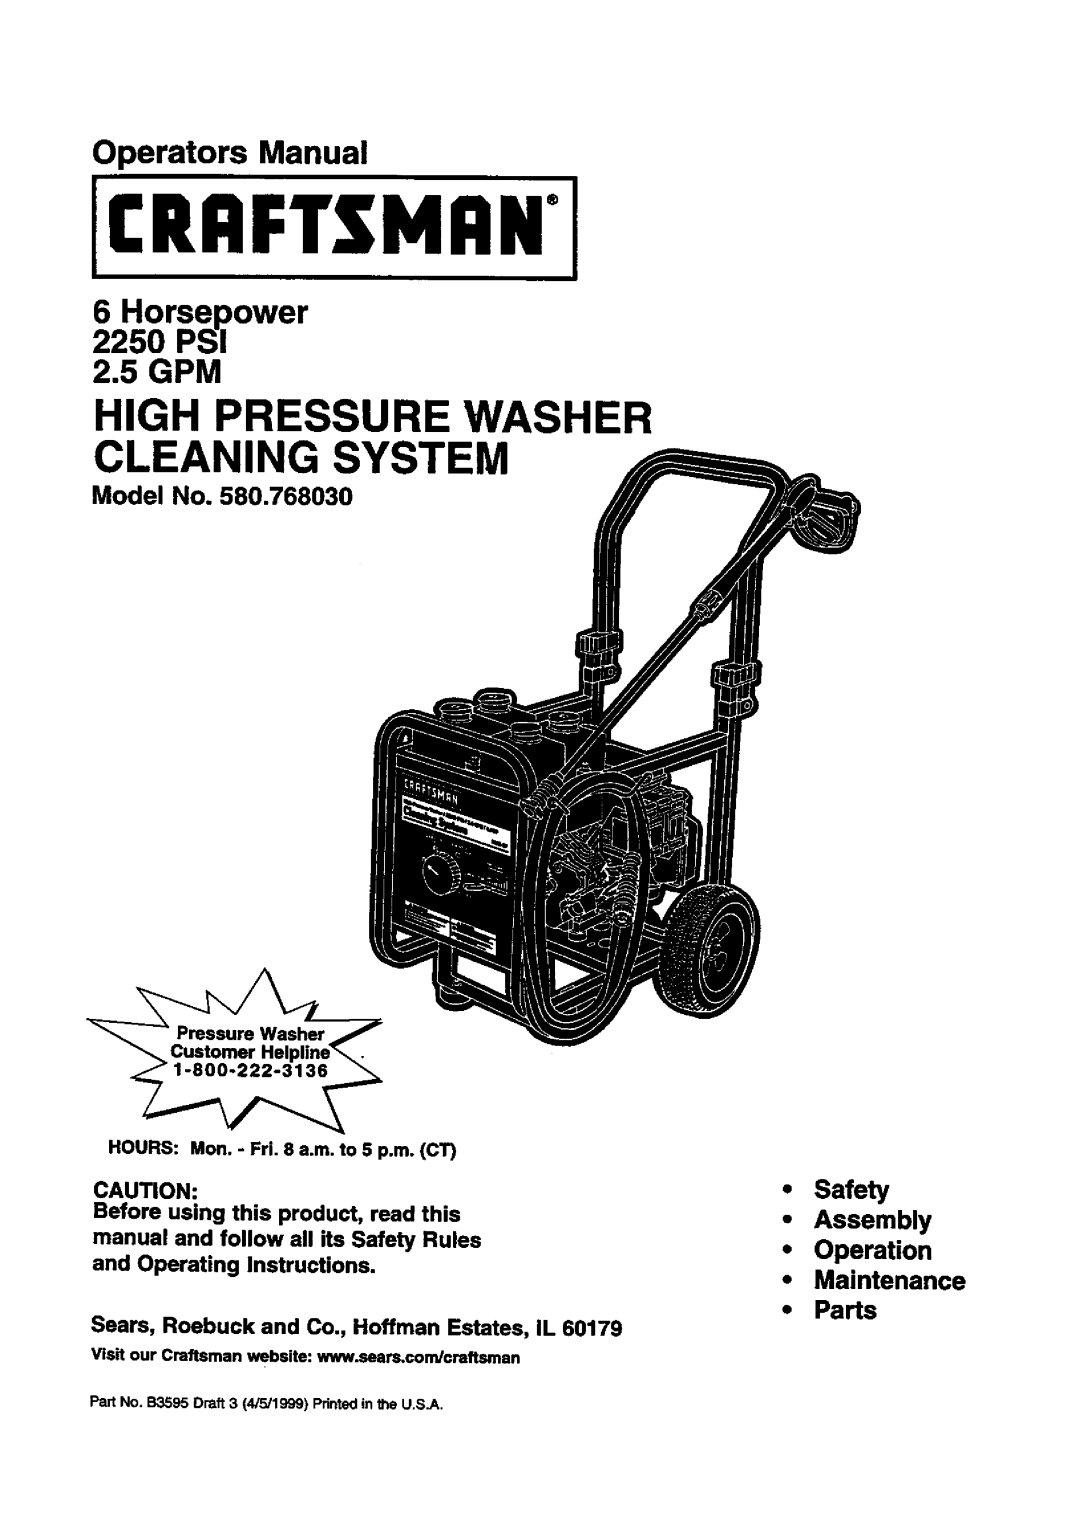 Craftsman 580.768030 operating instructions Cleaning System, High Pressure Washer, Operators Manual 2.5 GPM, Model No 